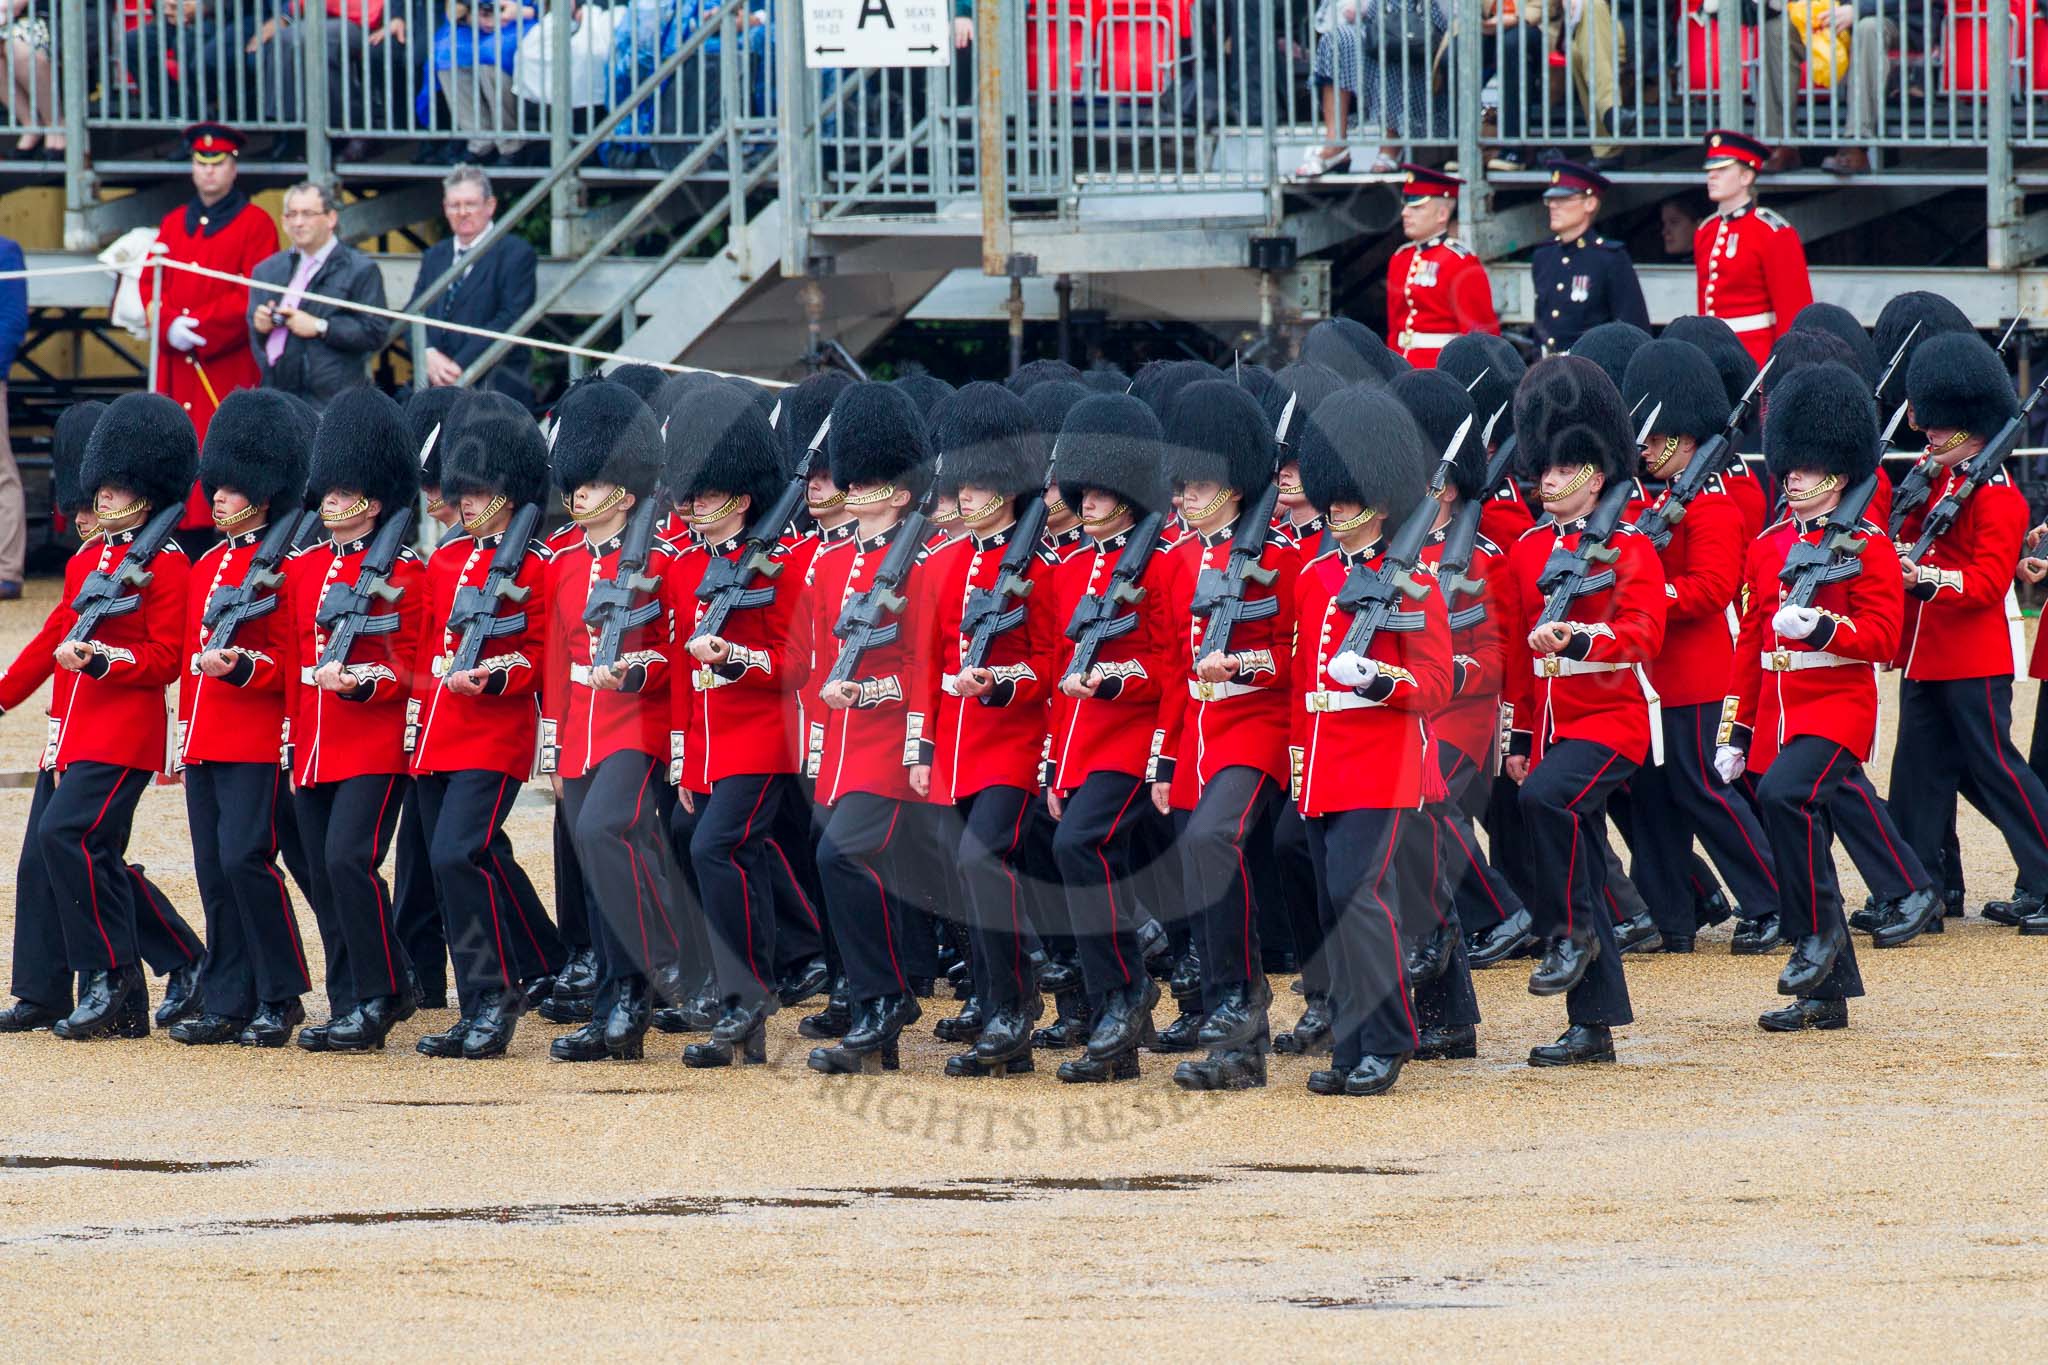 The Colonel's Review 2014.
Horse Guards Parade, Westminster,
London,

United Kingdom,
on 07 June 2014 at 11:48, image #569